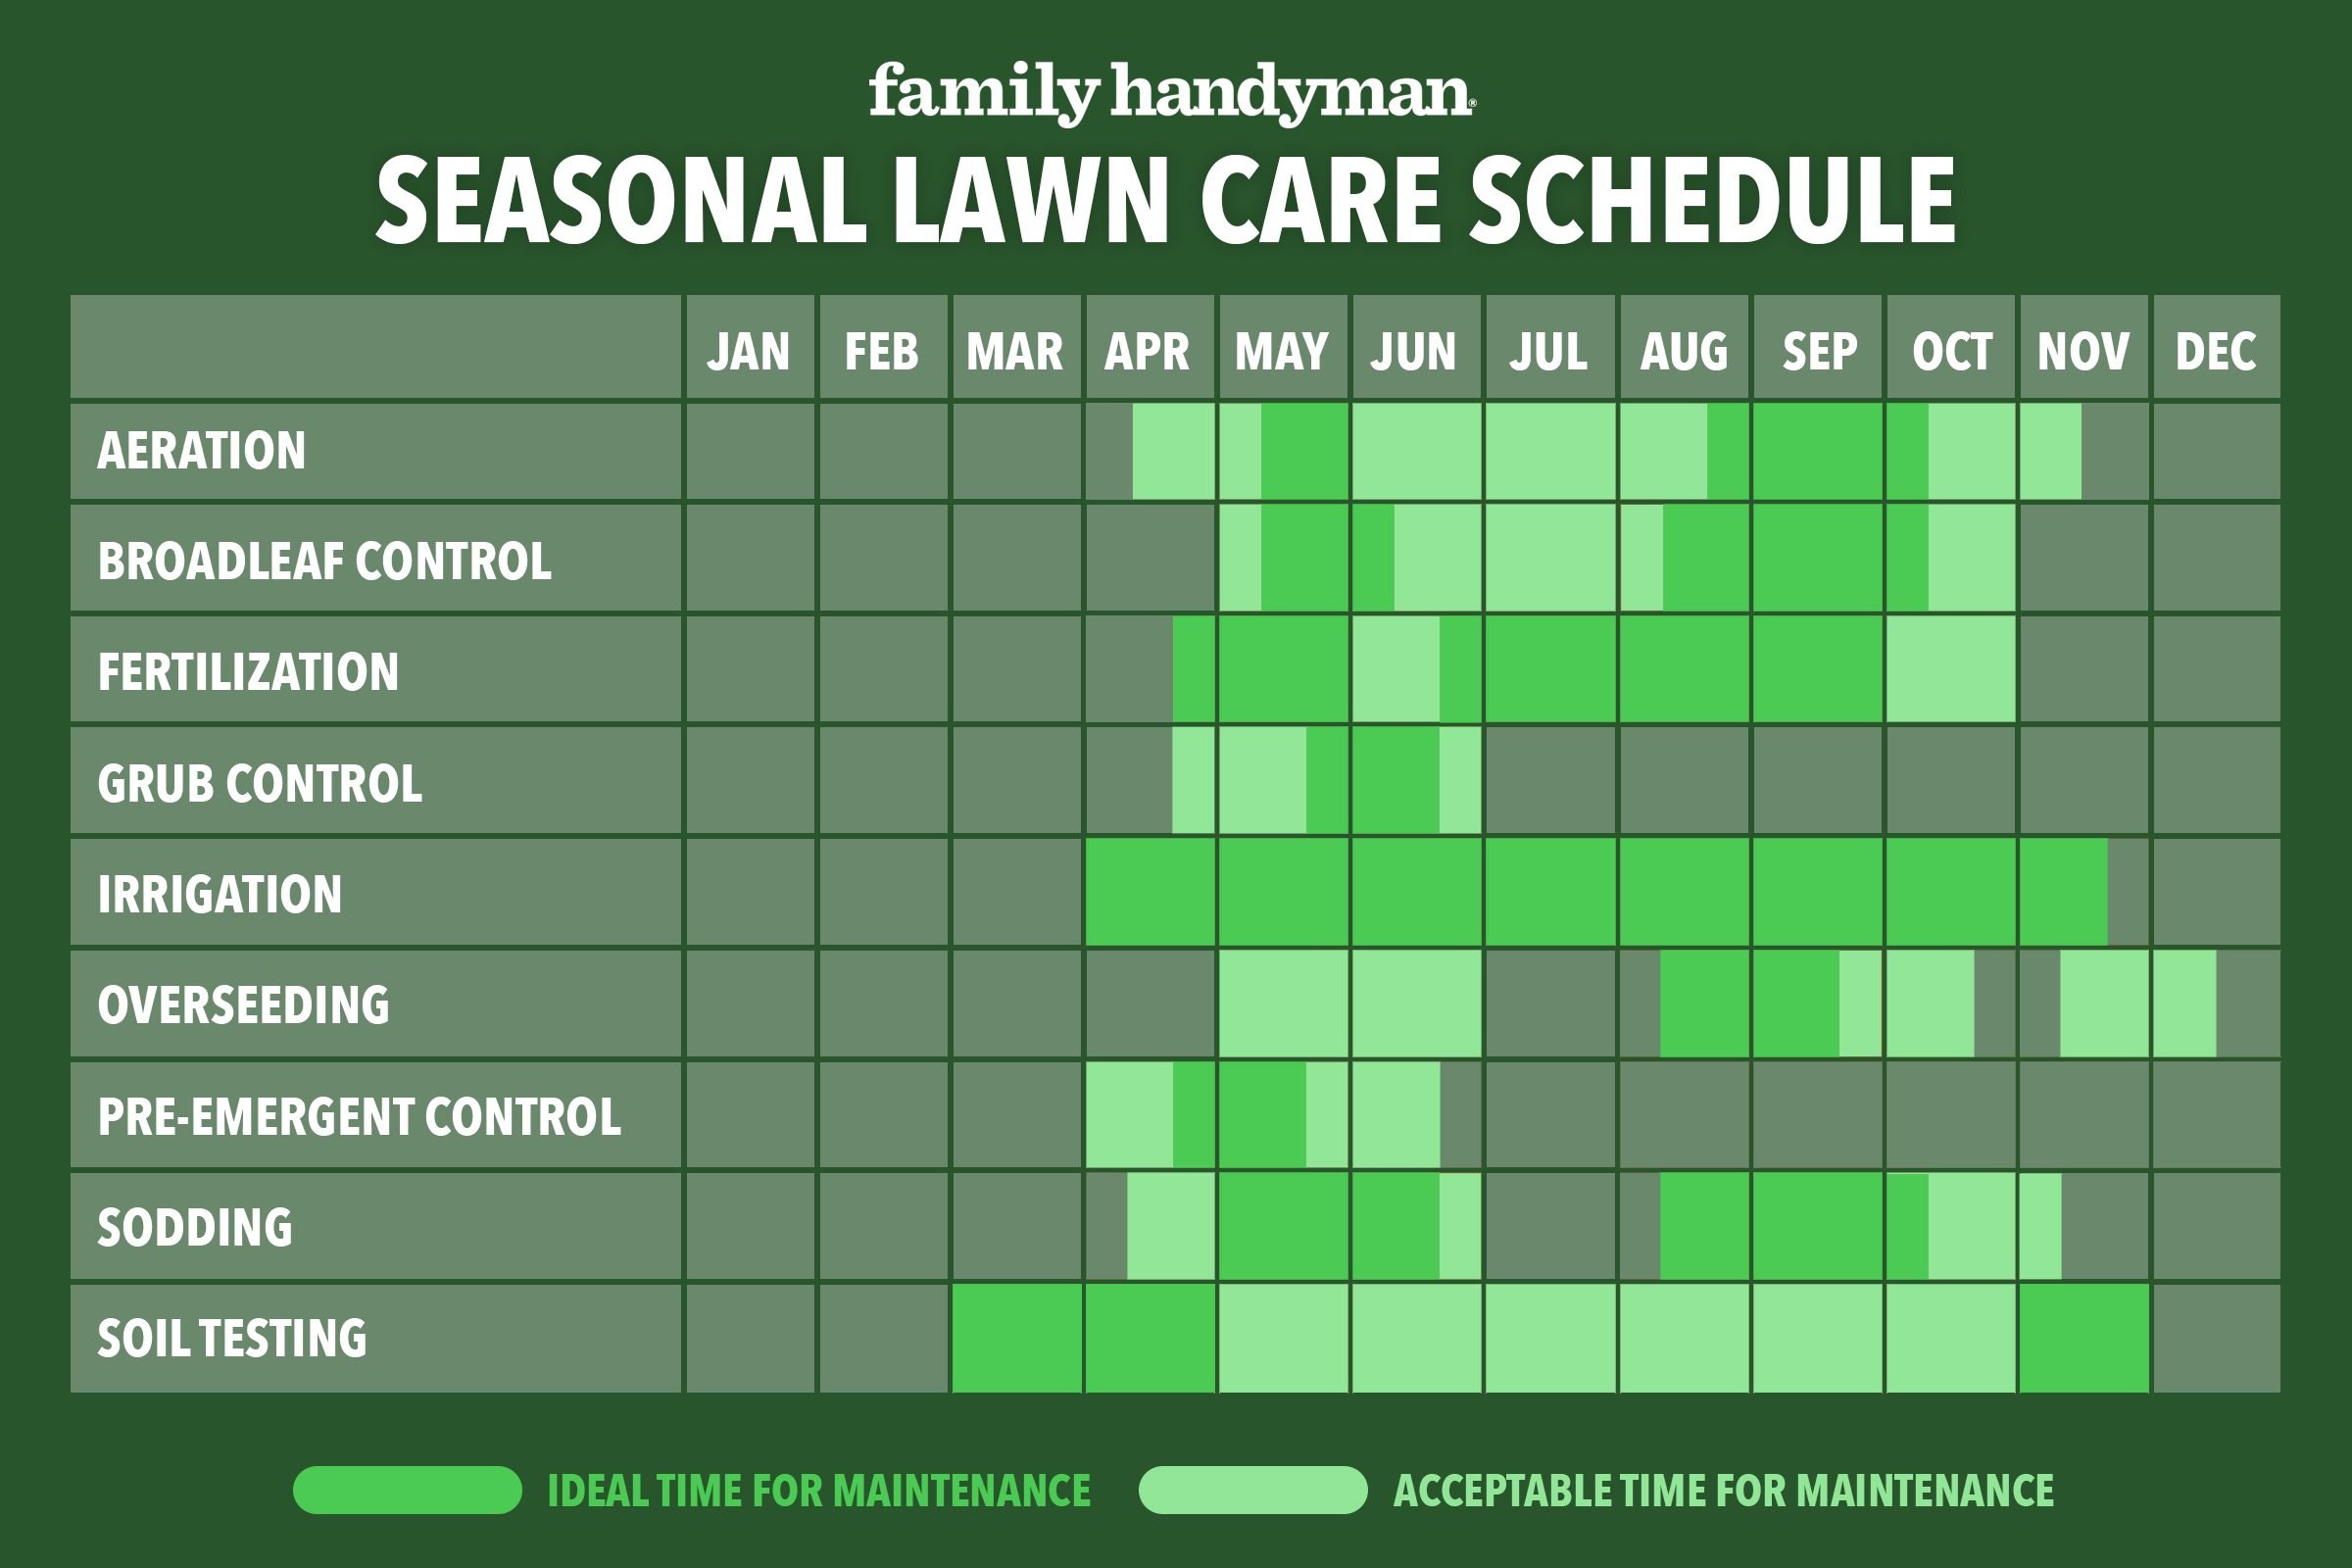 a-complete-lawn-maintenance-schedule-for-the-year